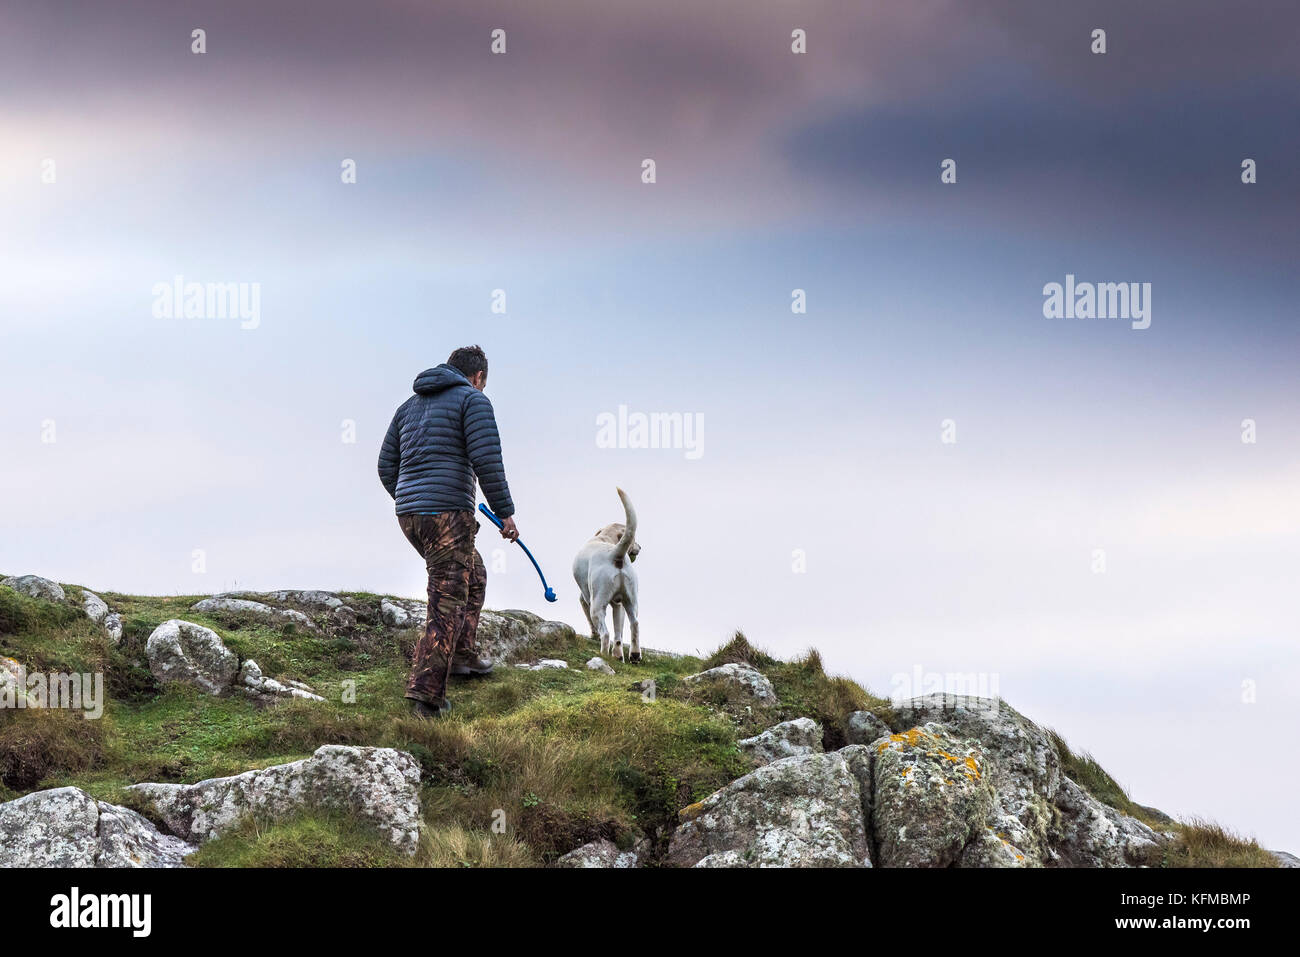 Dog walking - a man walking with his dog in the countryside. Stock Photo